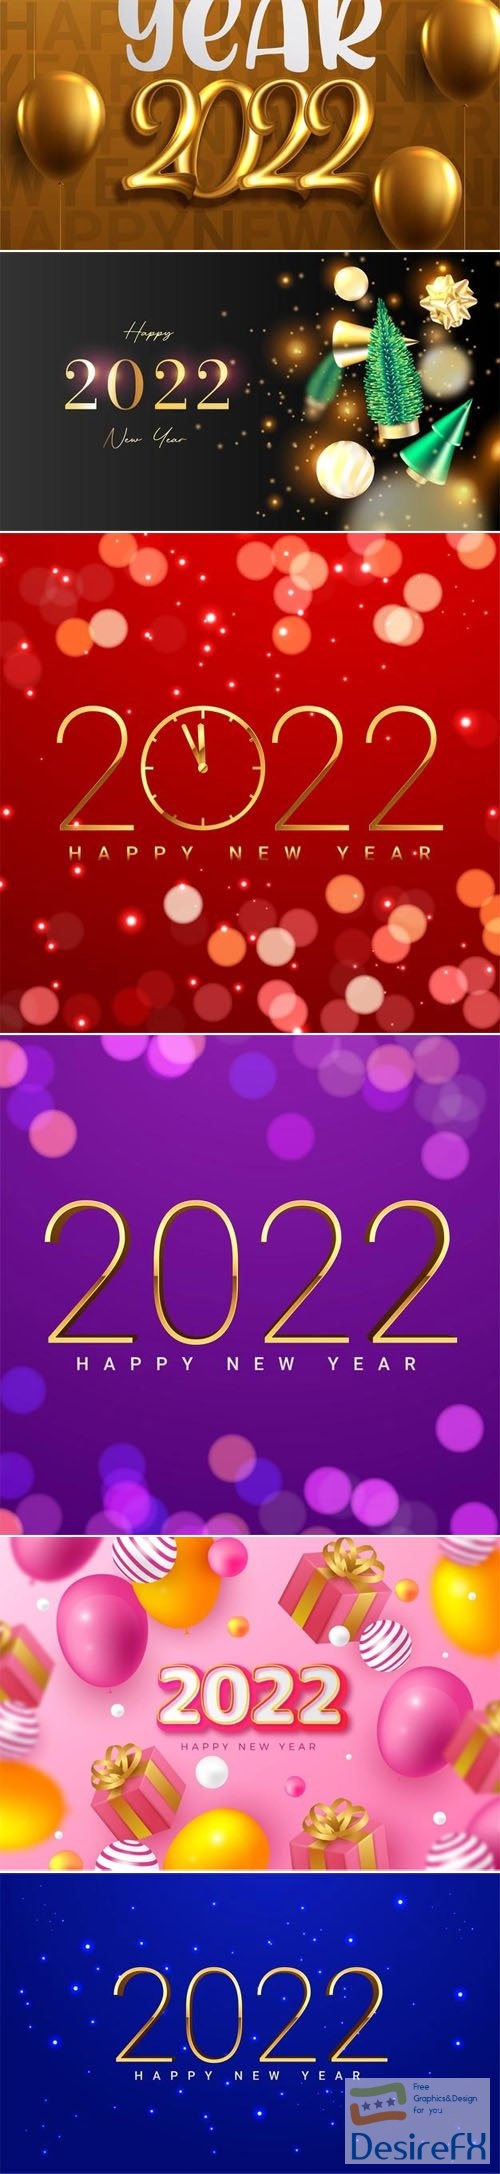 Download 11 Happy New Year 2022 Backgrounds Vector Collection ...